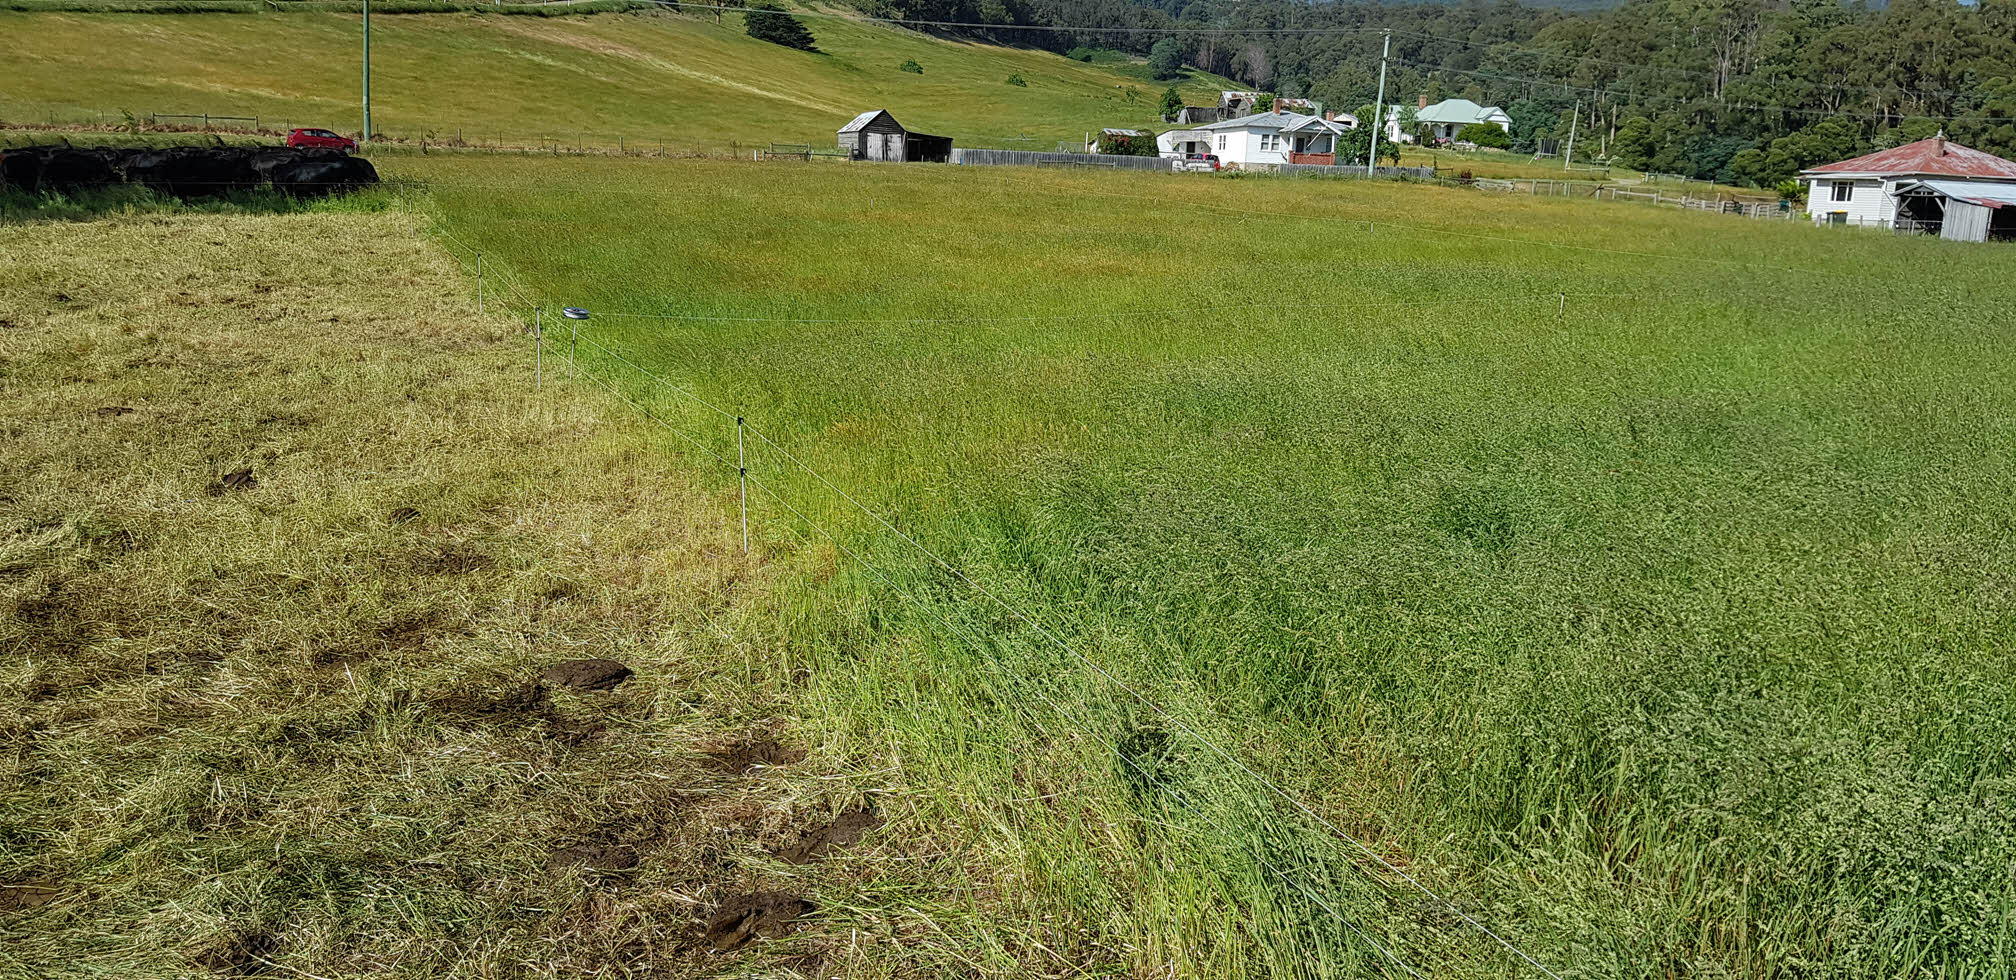 Cattle grazing in a paddock of long green grass, showing that 100% ground cover is retained before and after grazing.